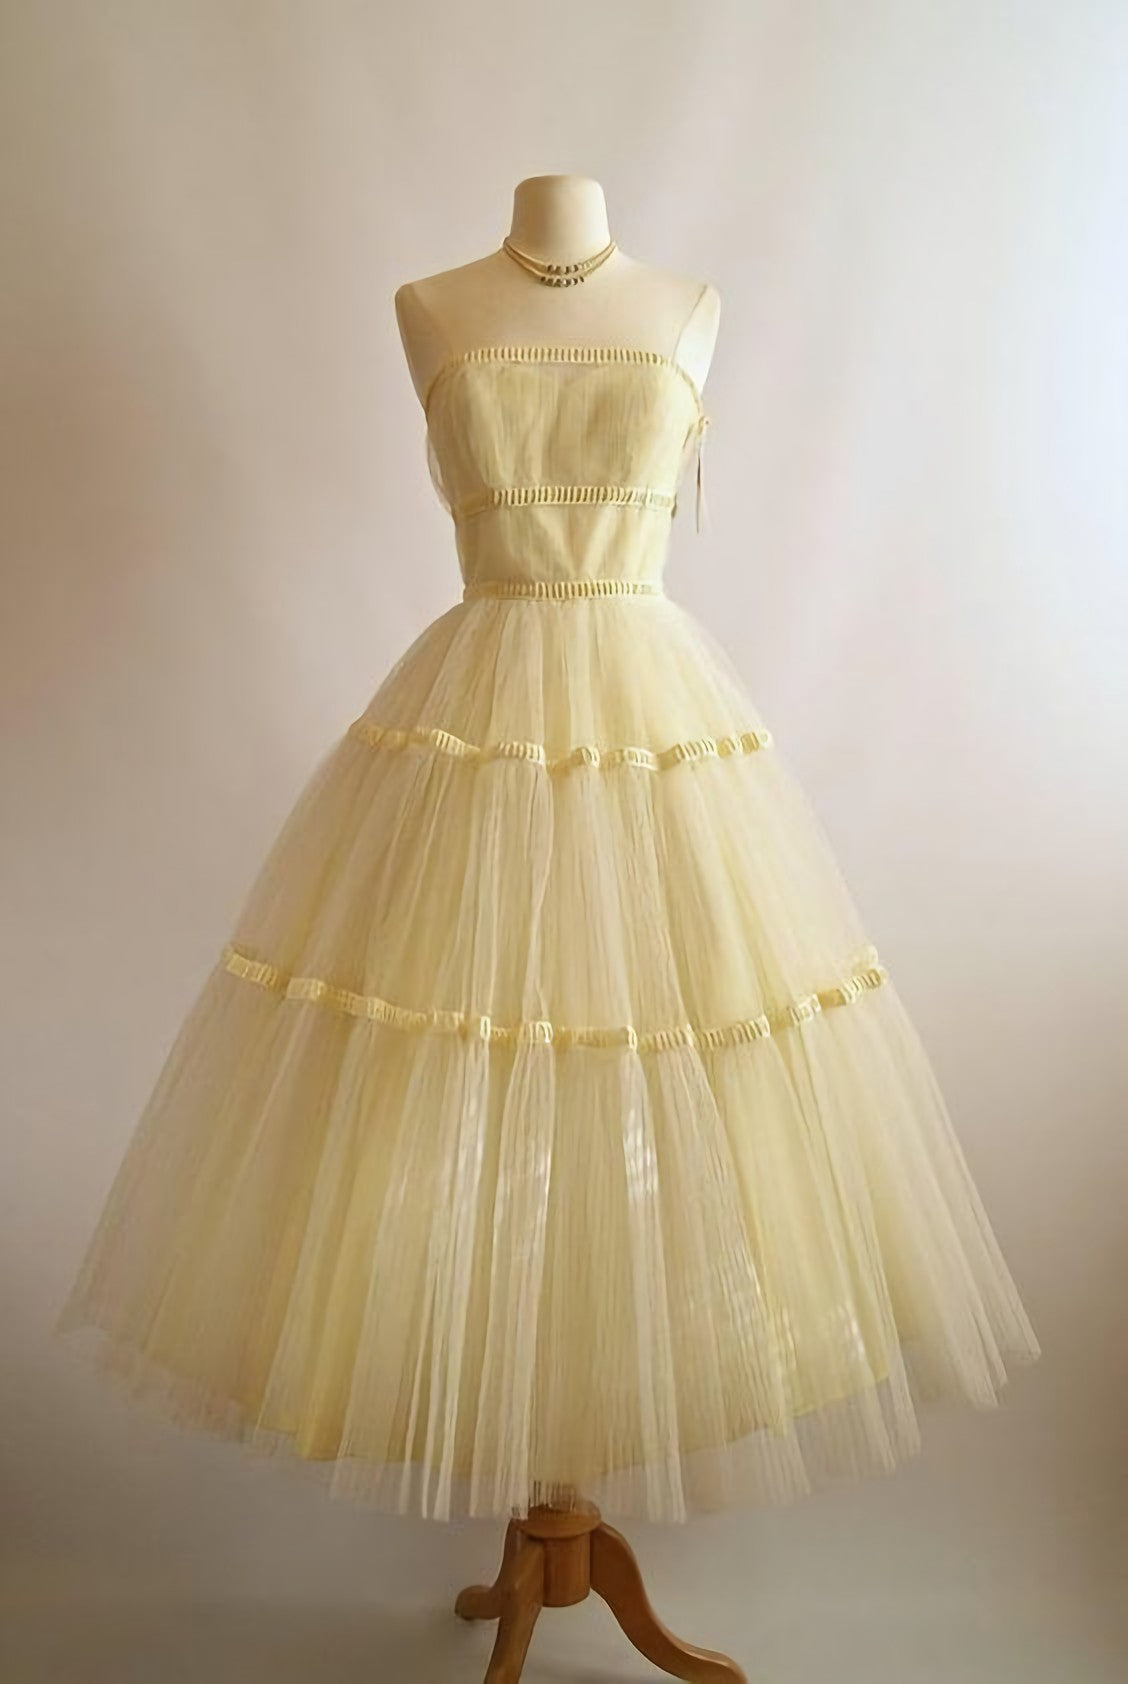 Vintage Yellow Dress, Corset Homecoming Dress outfit, Prom Dresses Aesthetic